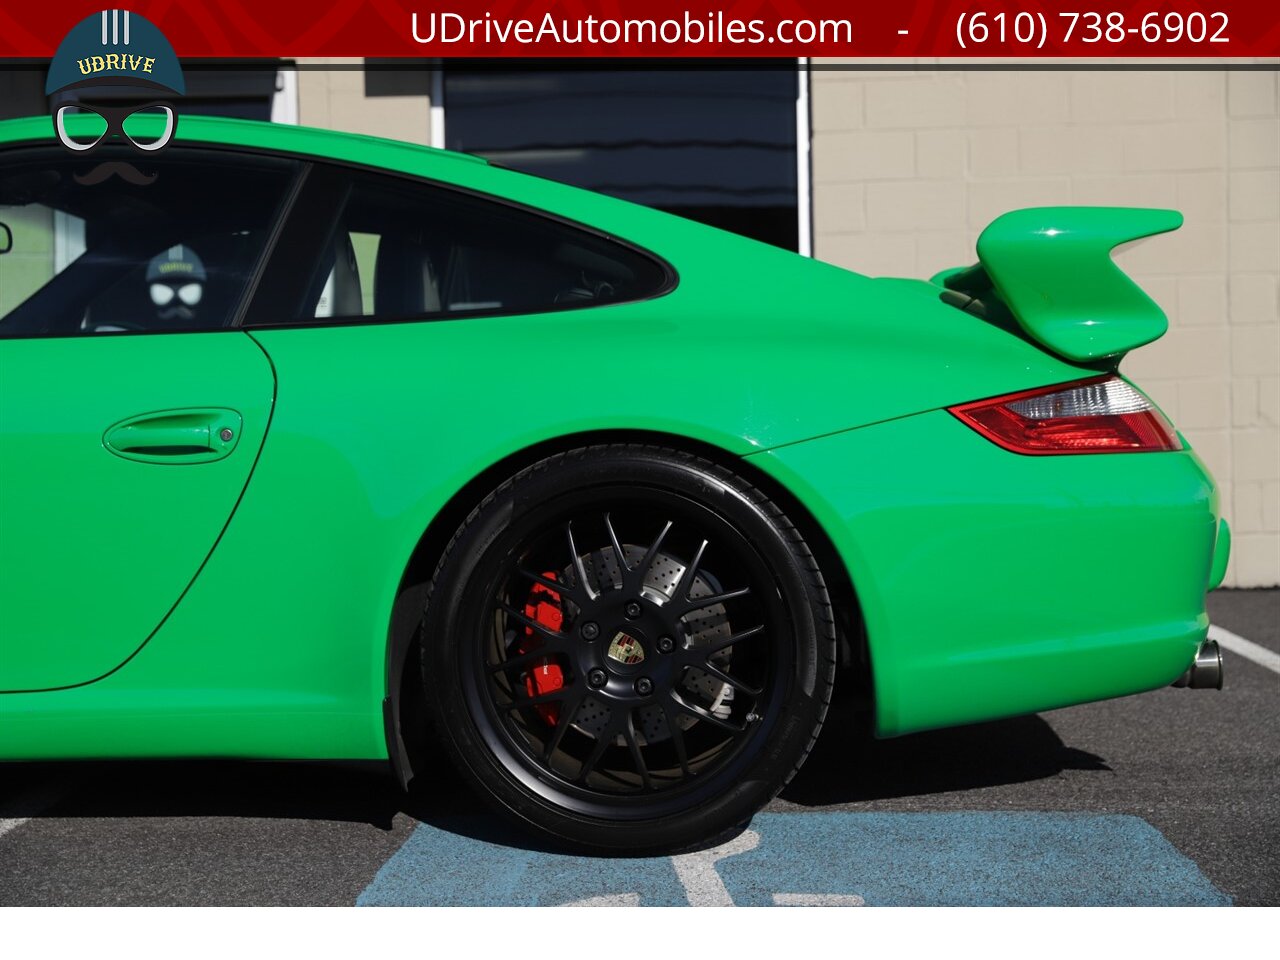 2008 Porsche 911 S 997 6Sp PTS RS Green AeroKit 1of a Kind  $118k MSRP Champion F77 Pkg RG5 Whls - Photo 25 - West Chester, PA 19382